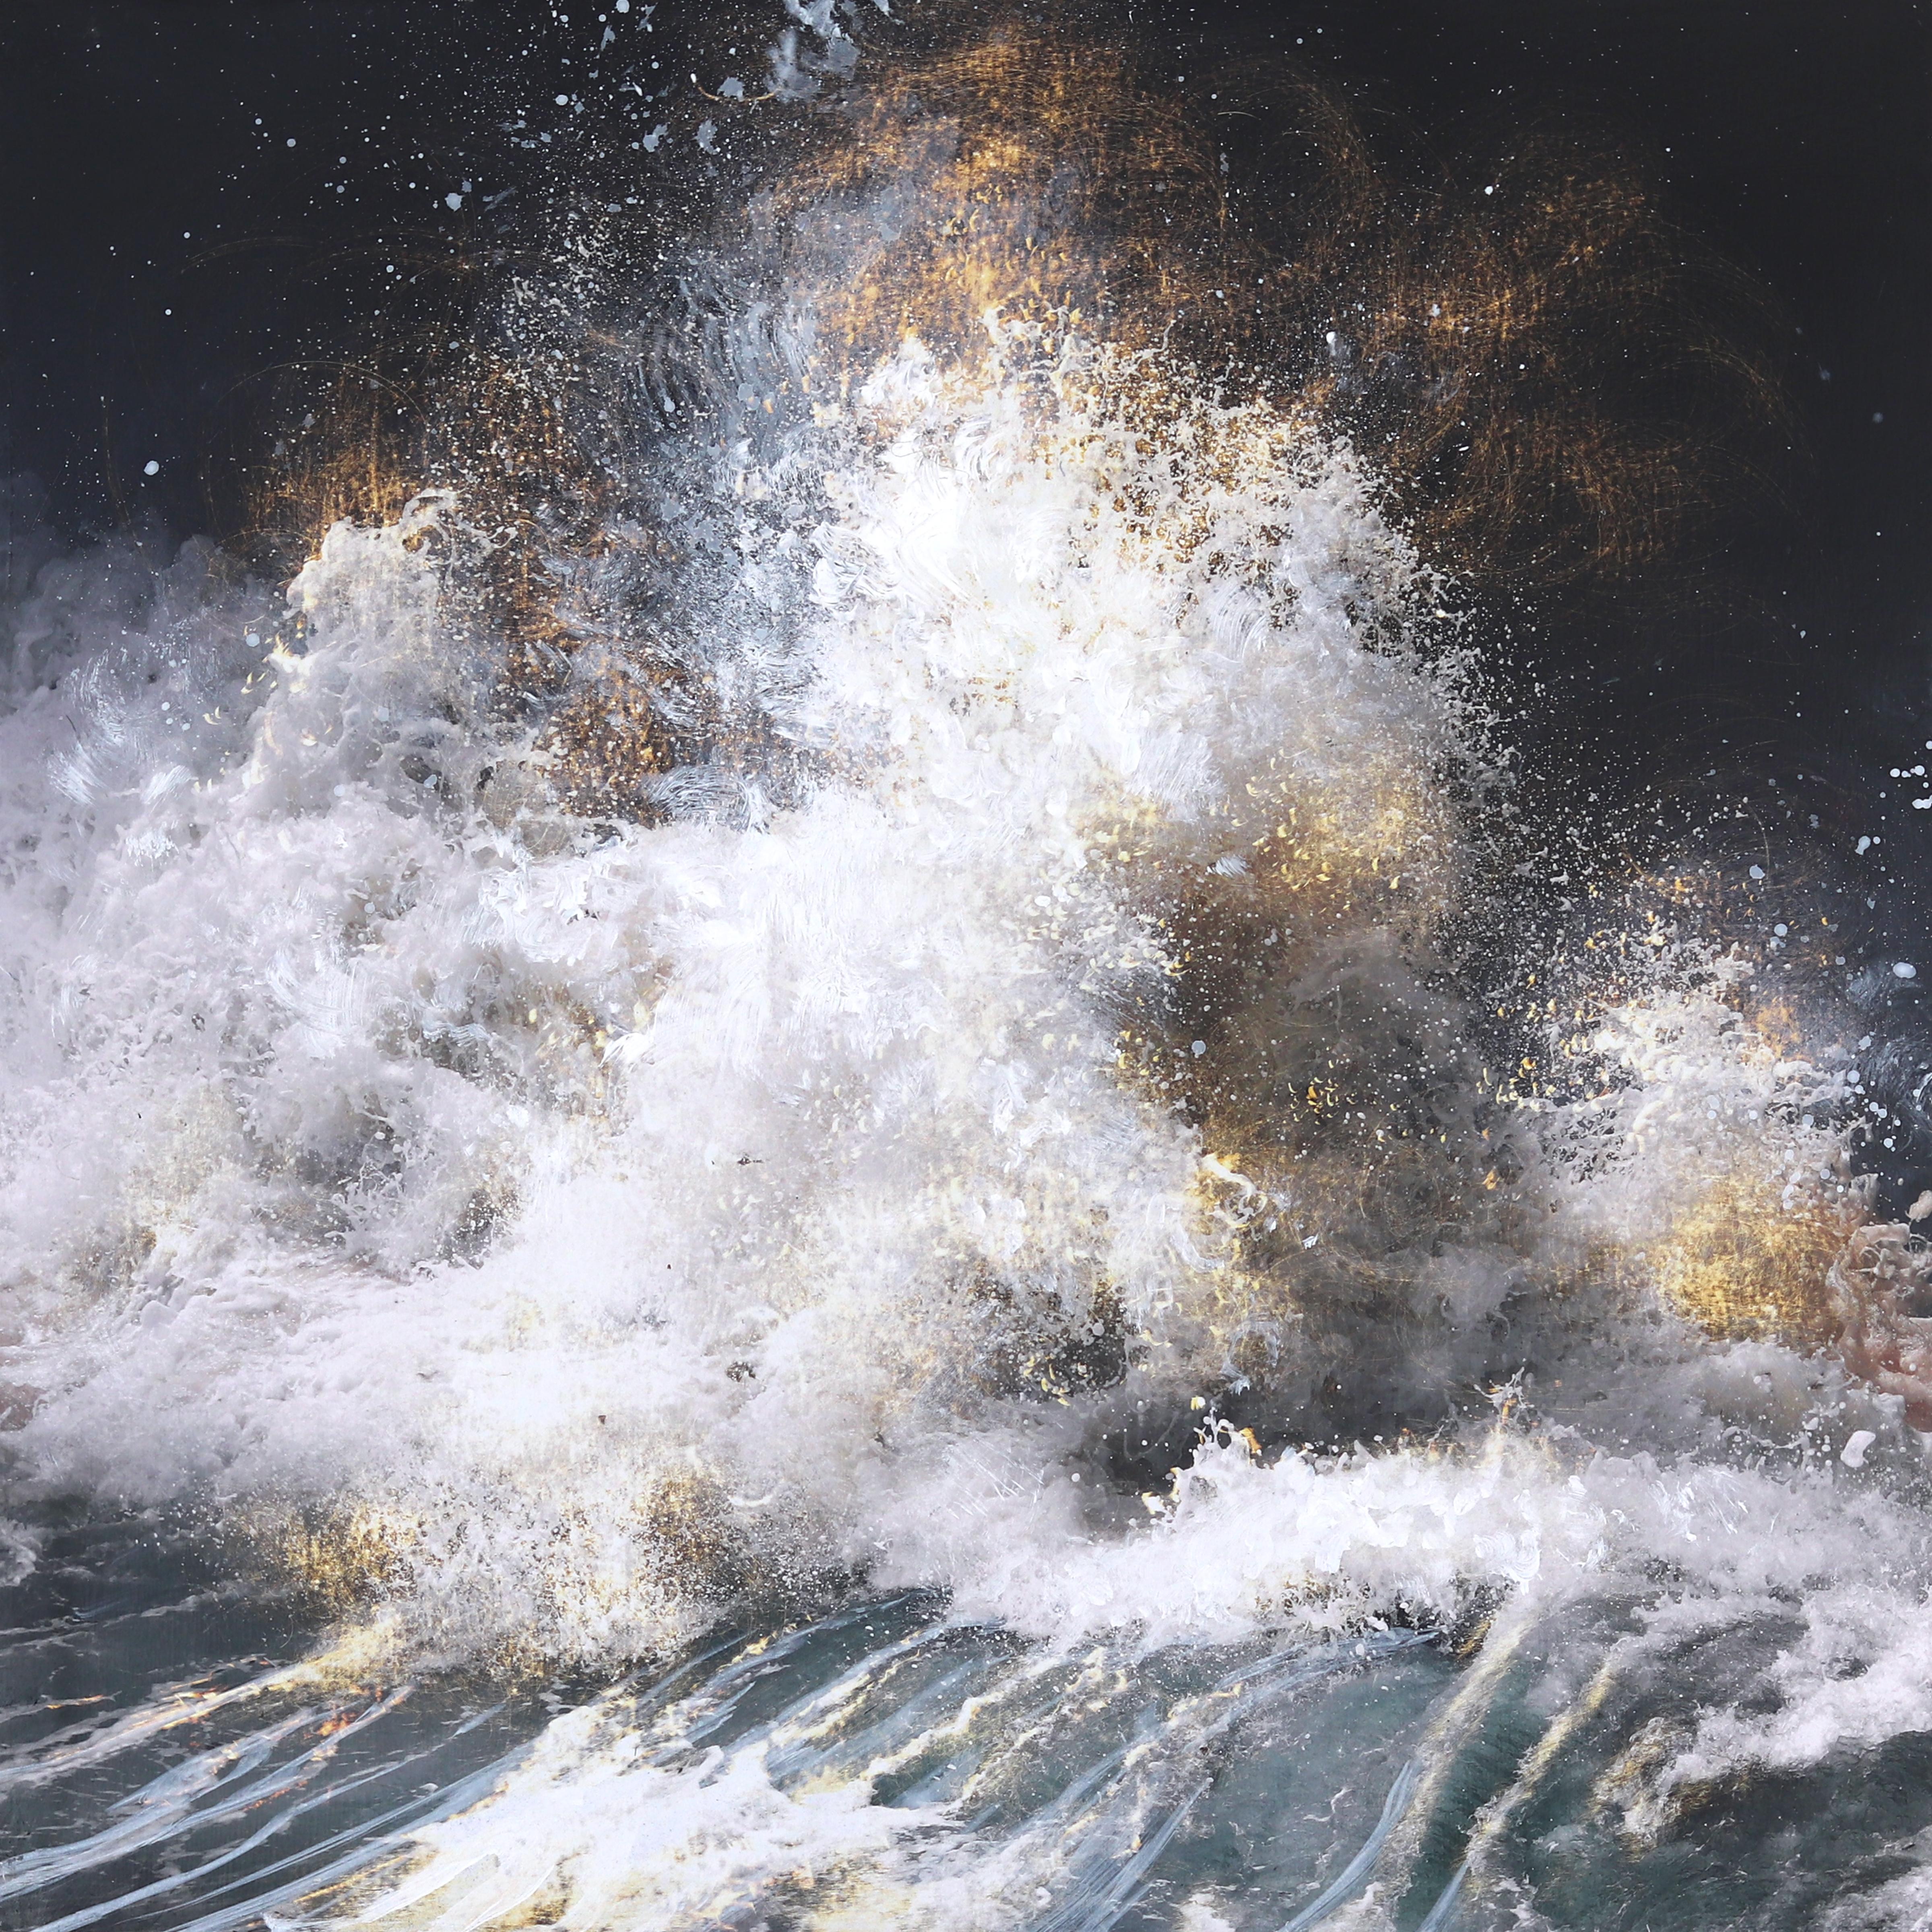 Heart & Soul Opens No. 4 - Photorealistic Painting of Powerful Ocean Waves - Mixed Media Art by Steven Nederveen